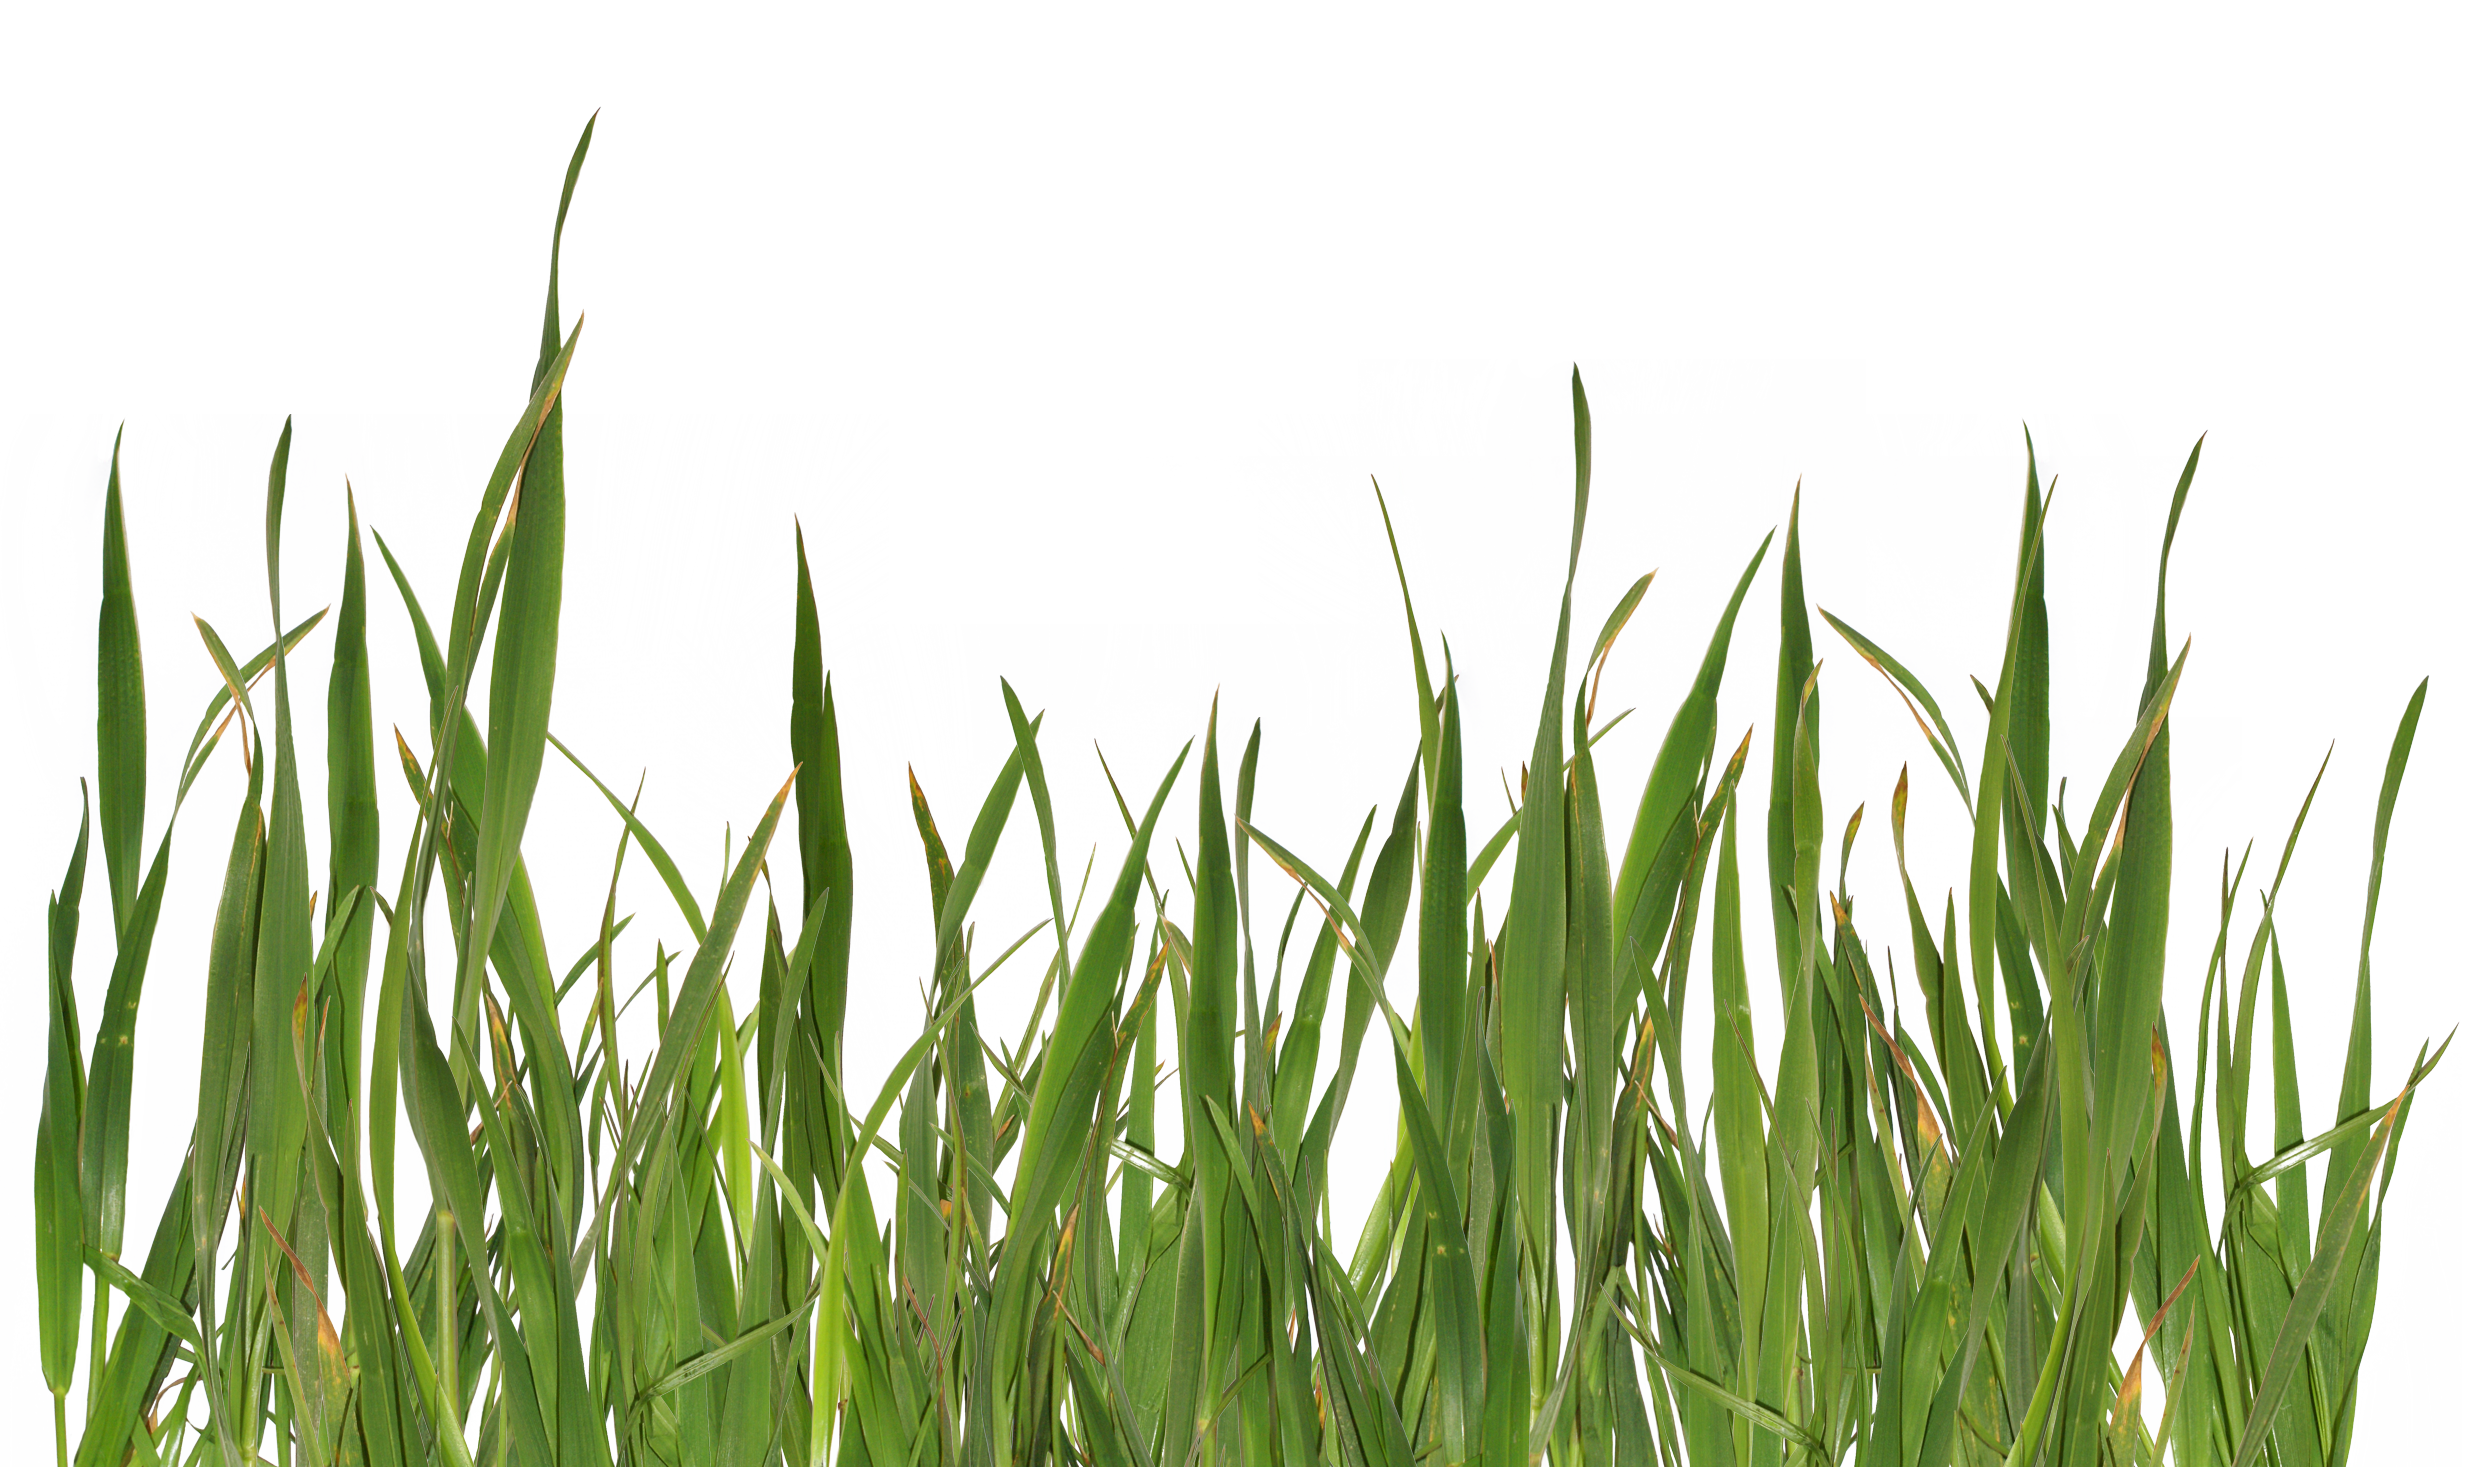 Grass PNG images, pictures.